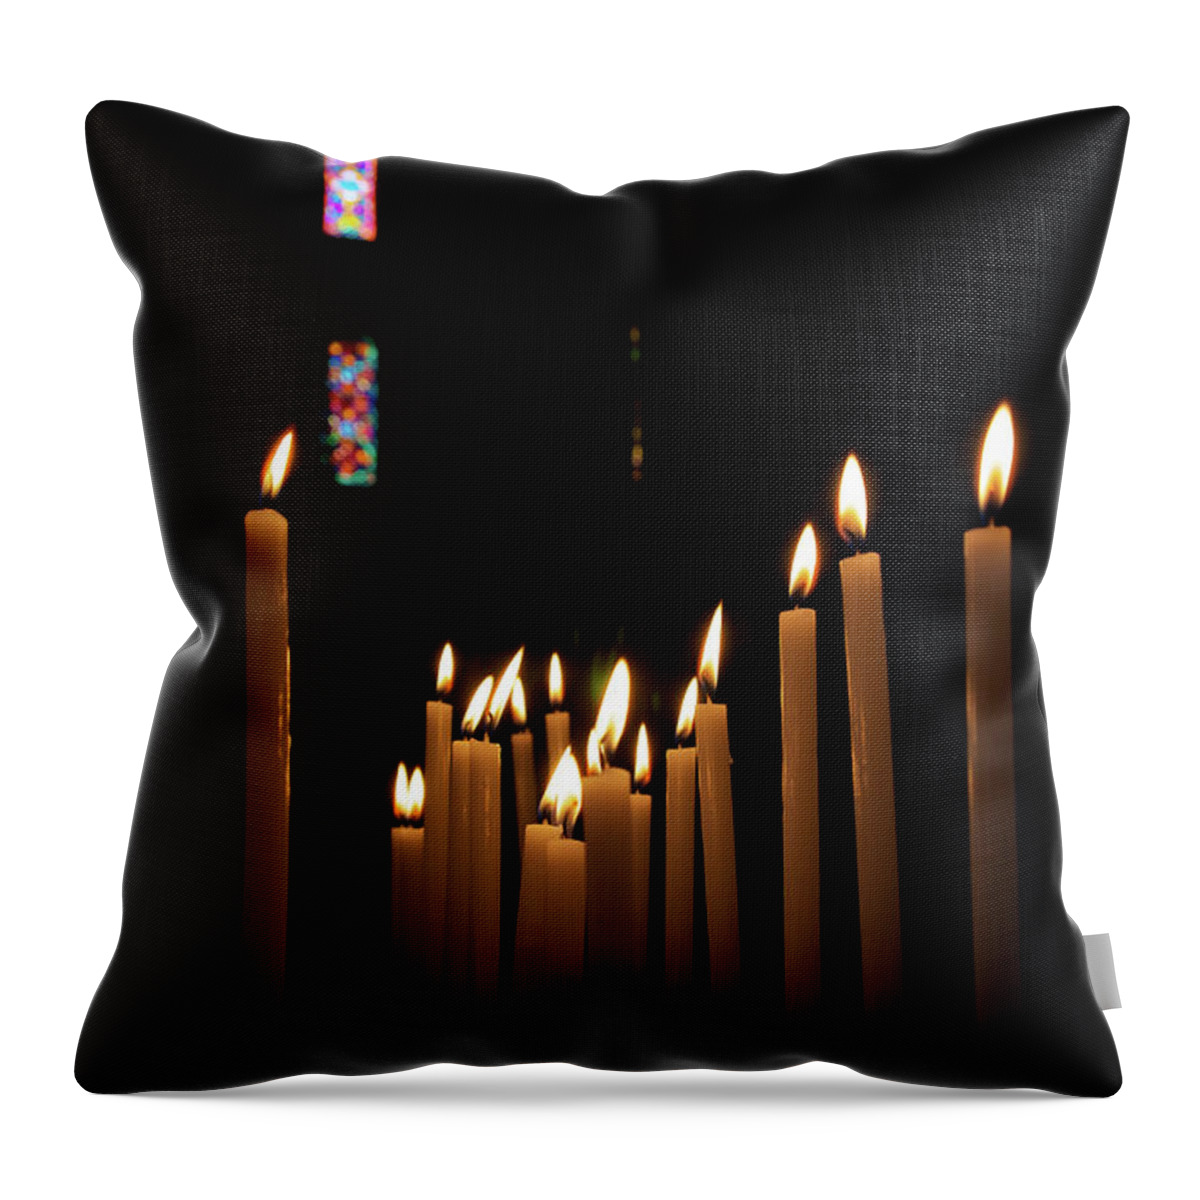 Tranquility Throw Pillow featuring the photograph Votive Candles Burning In A Church In by Gregory Adams